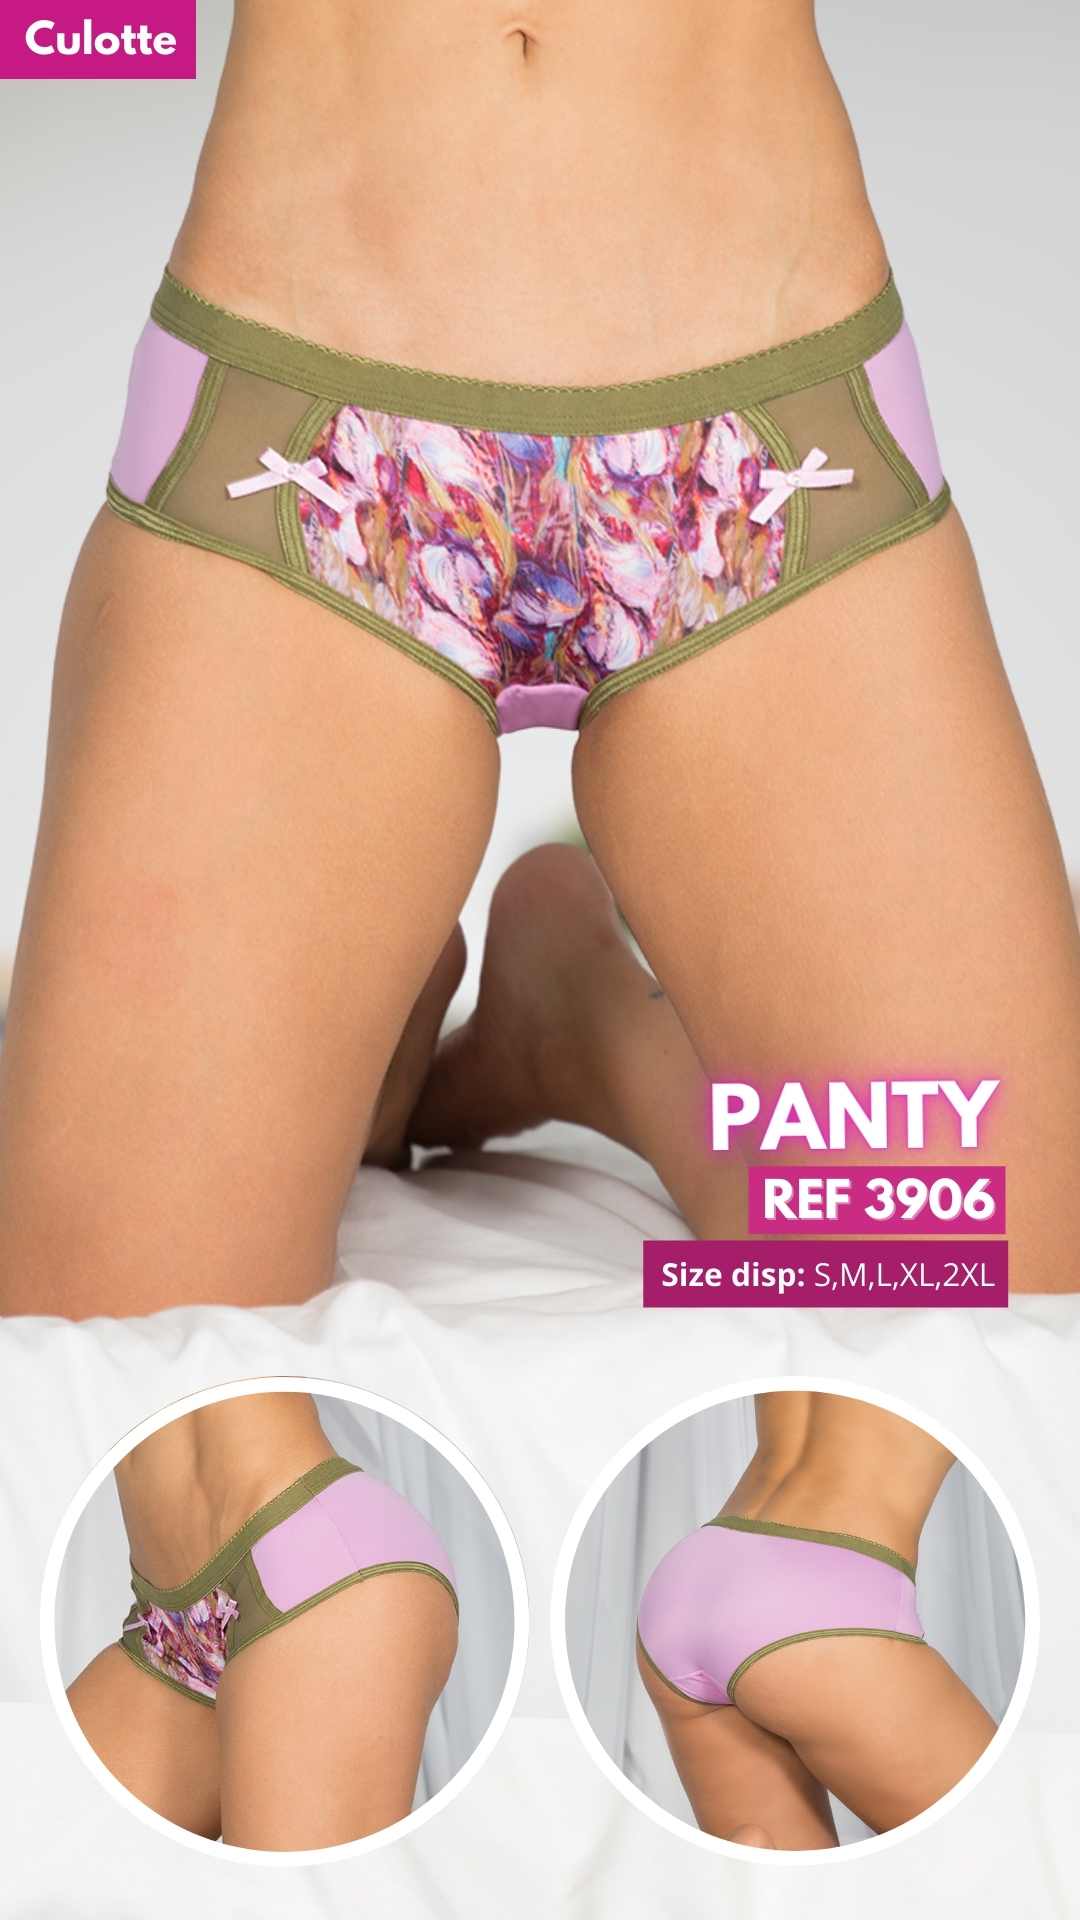 Panty Ref. 3906 (Pack 3 Units)